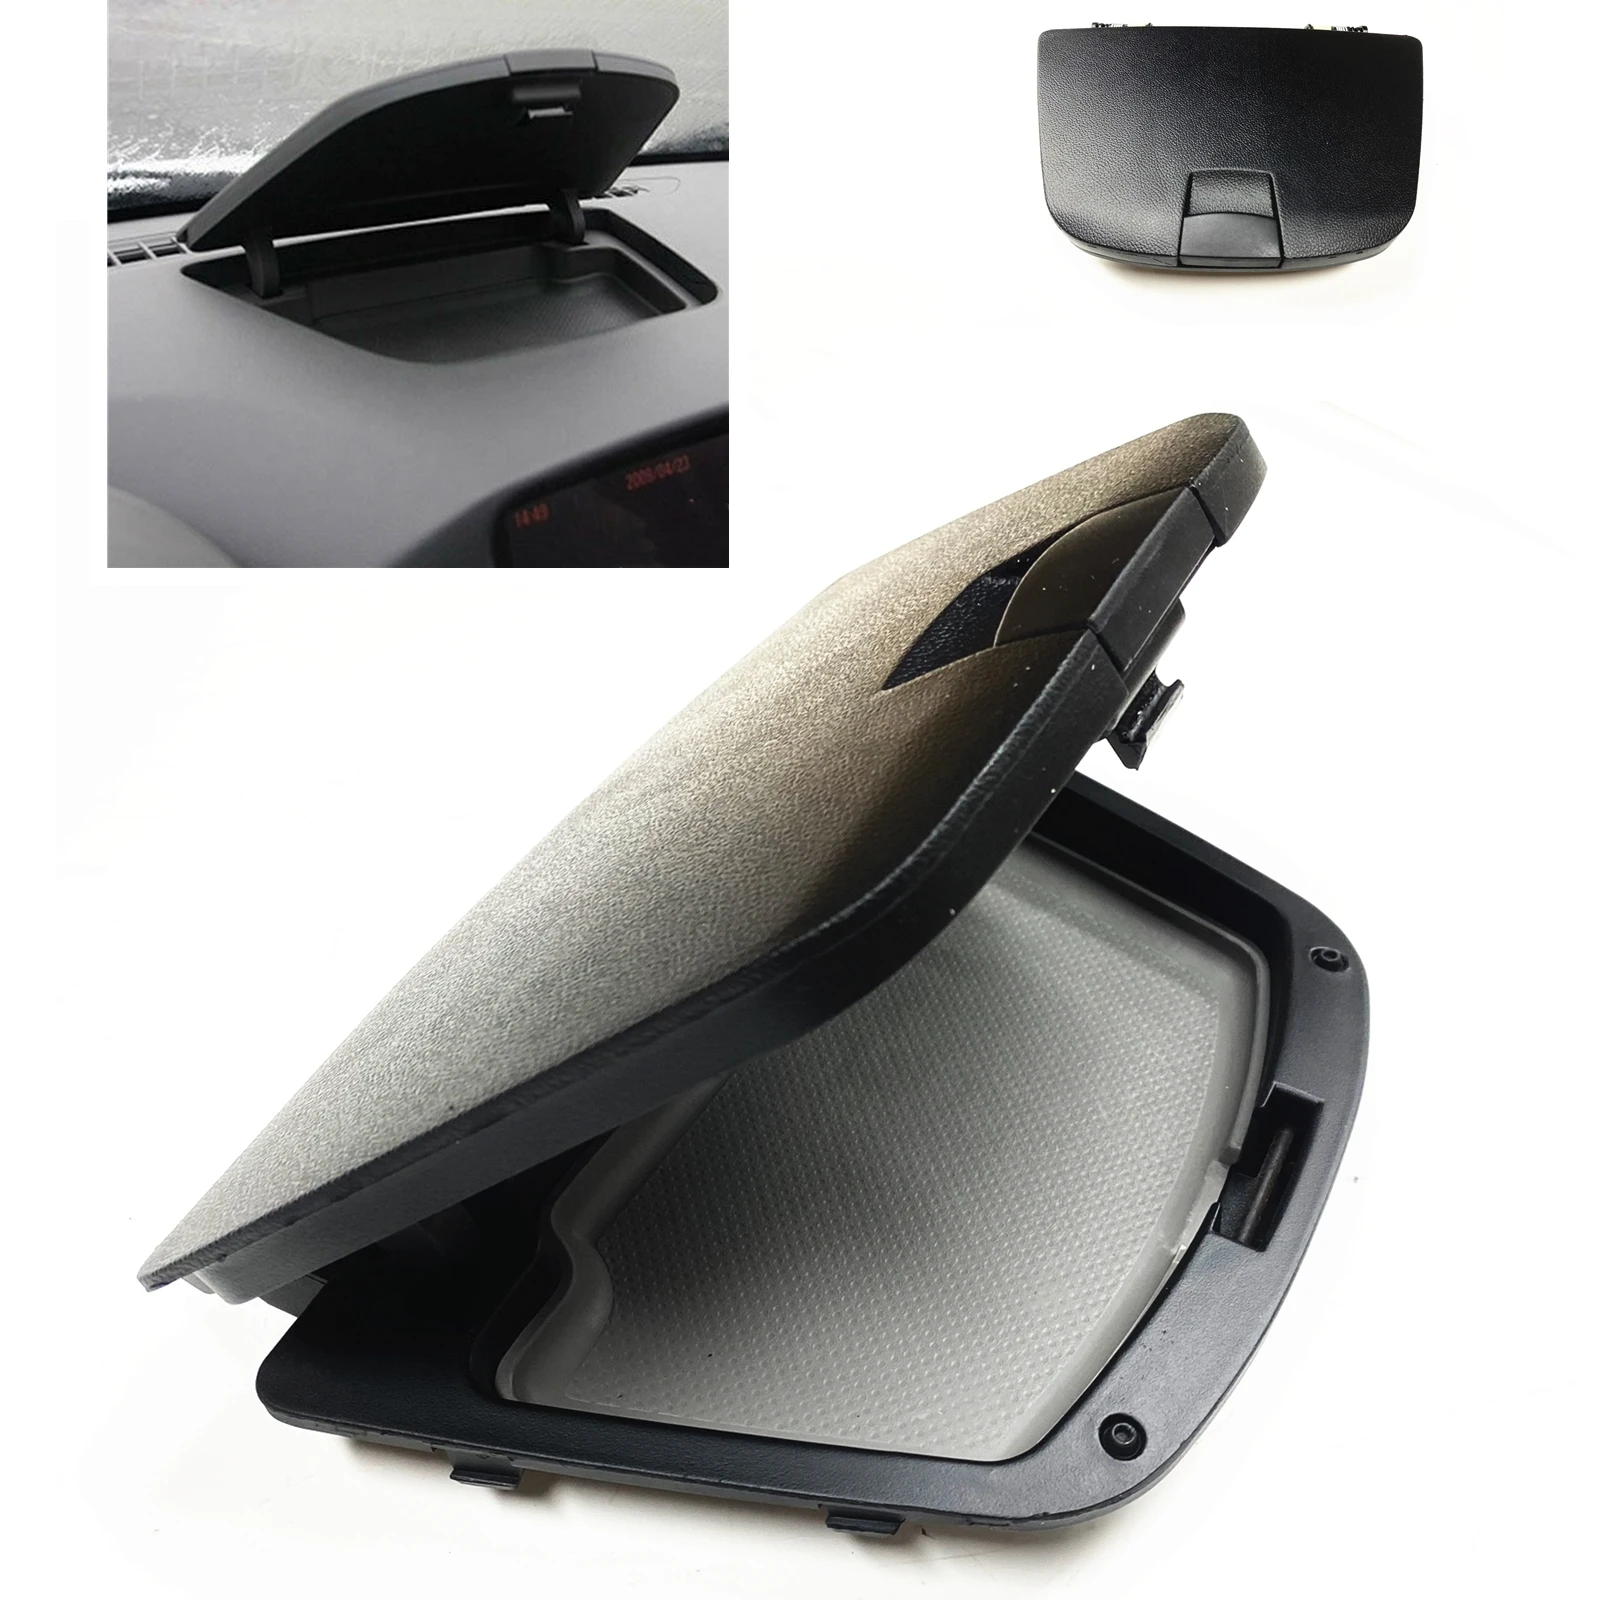 Center Storage Box Dashboard Update Tray For Chevrolet Cruze 2010-2015 Dash Container Pocket Carriage Case Chest Basket Cover